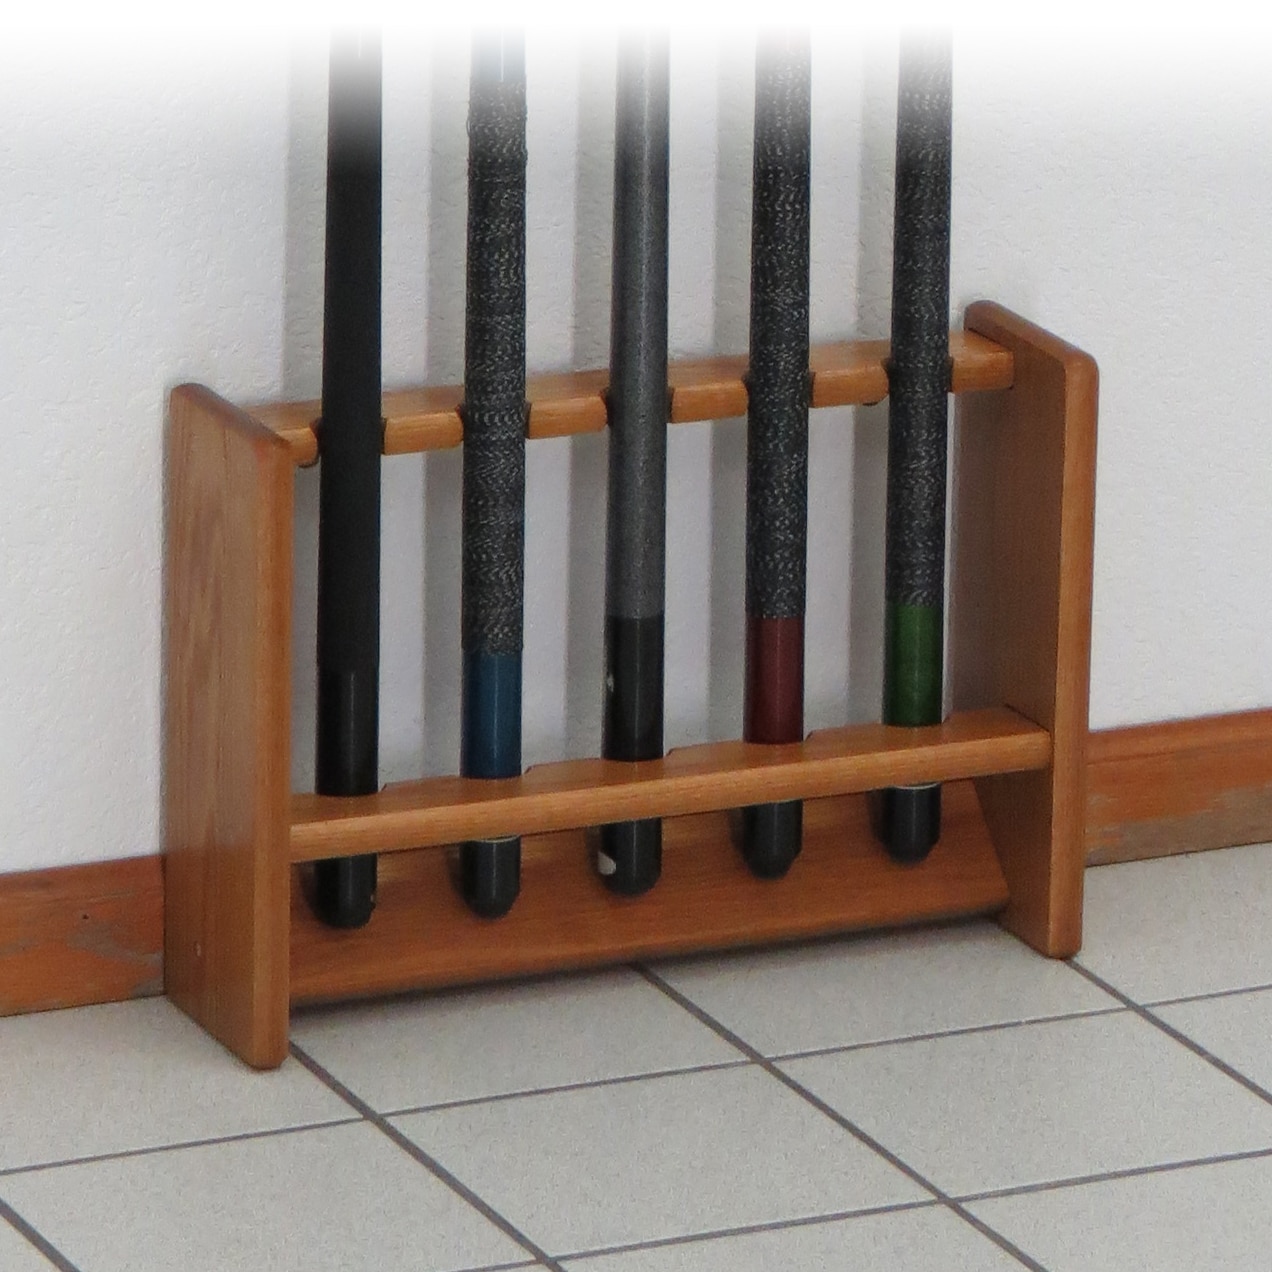 Pool Cue Rack, Cue, Finishes Bed Bath  Beyond 19556264